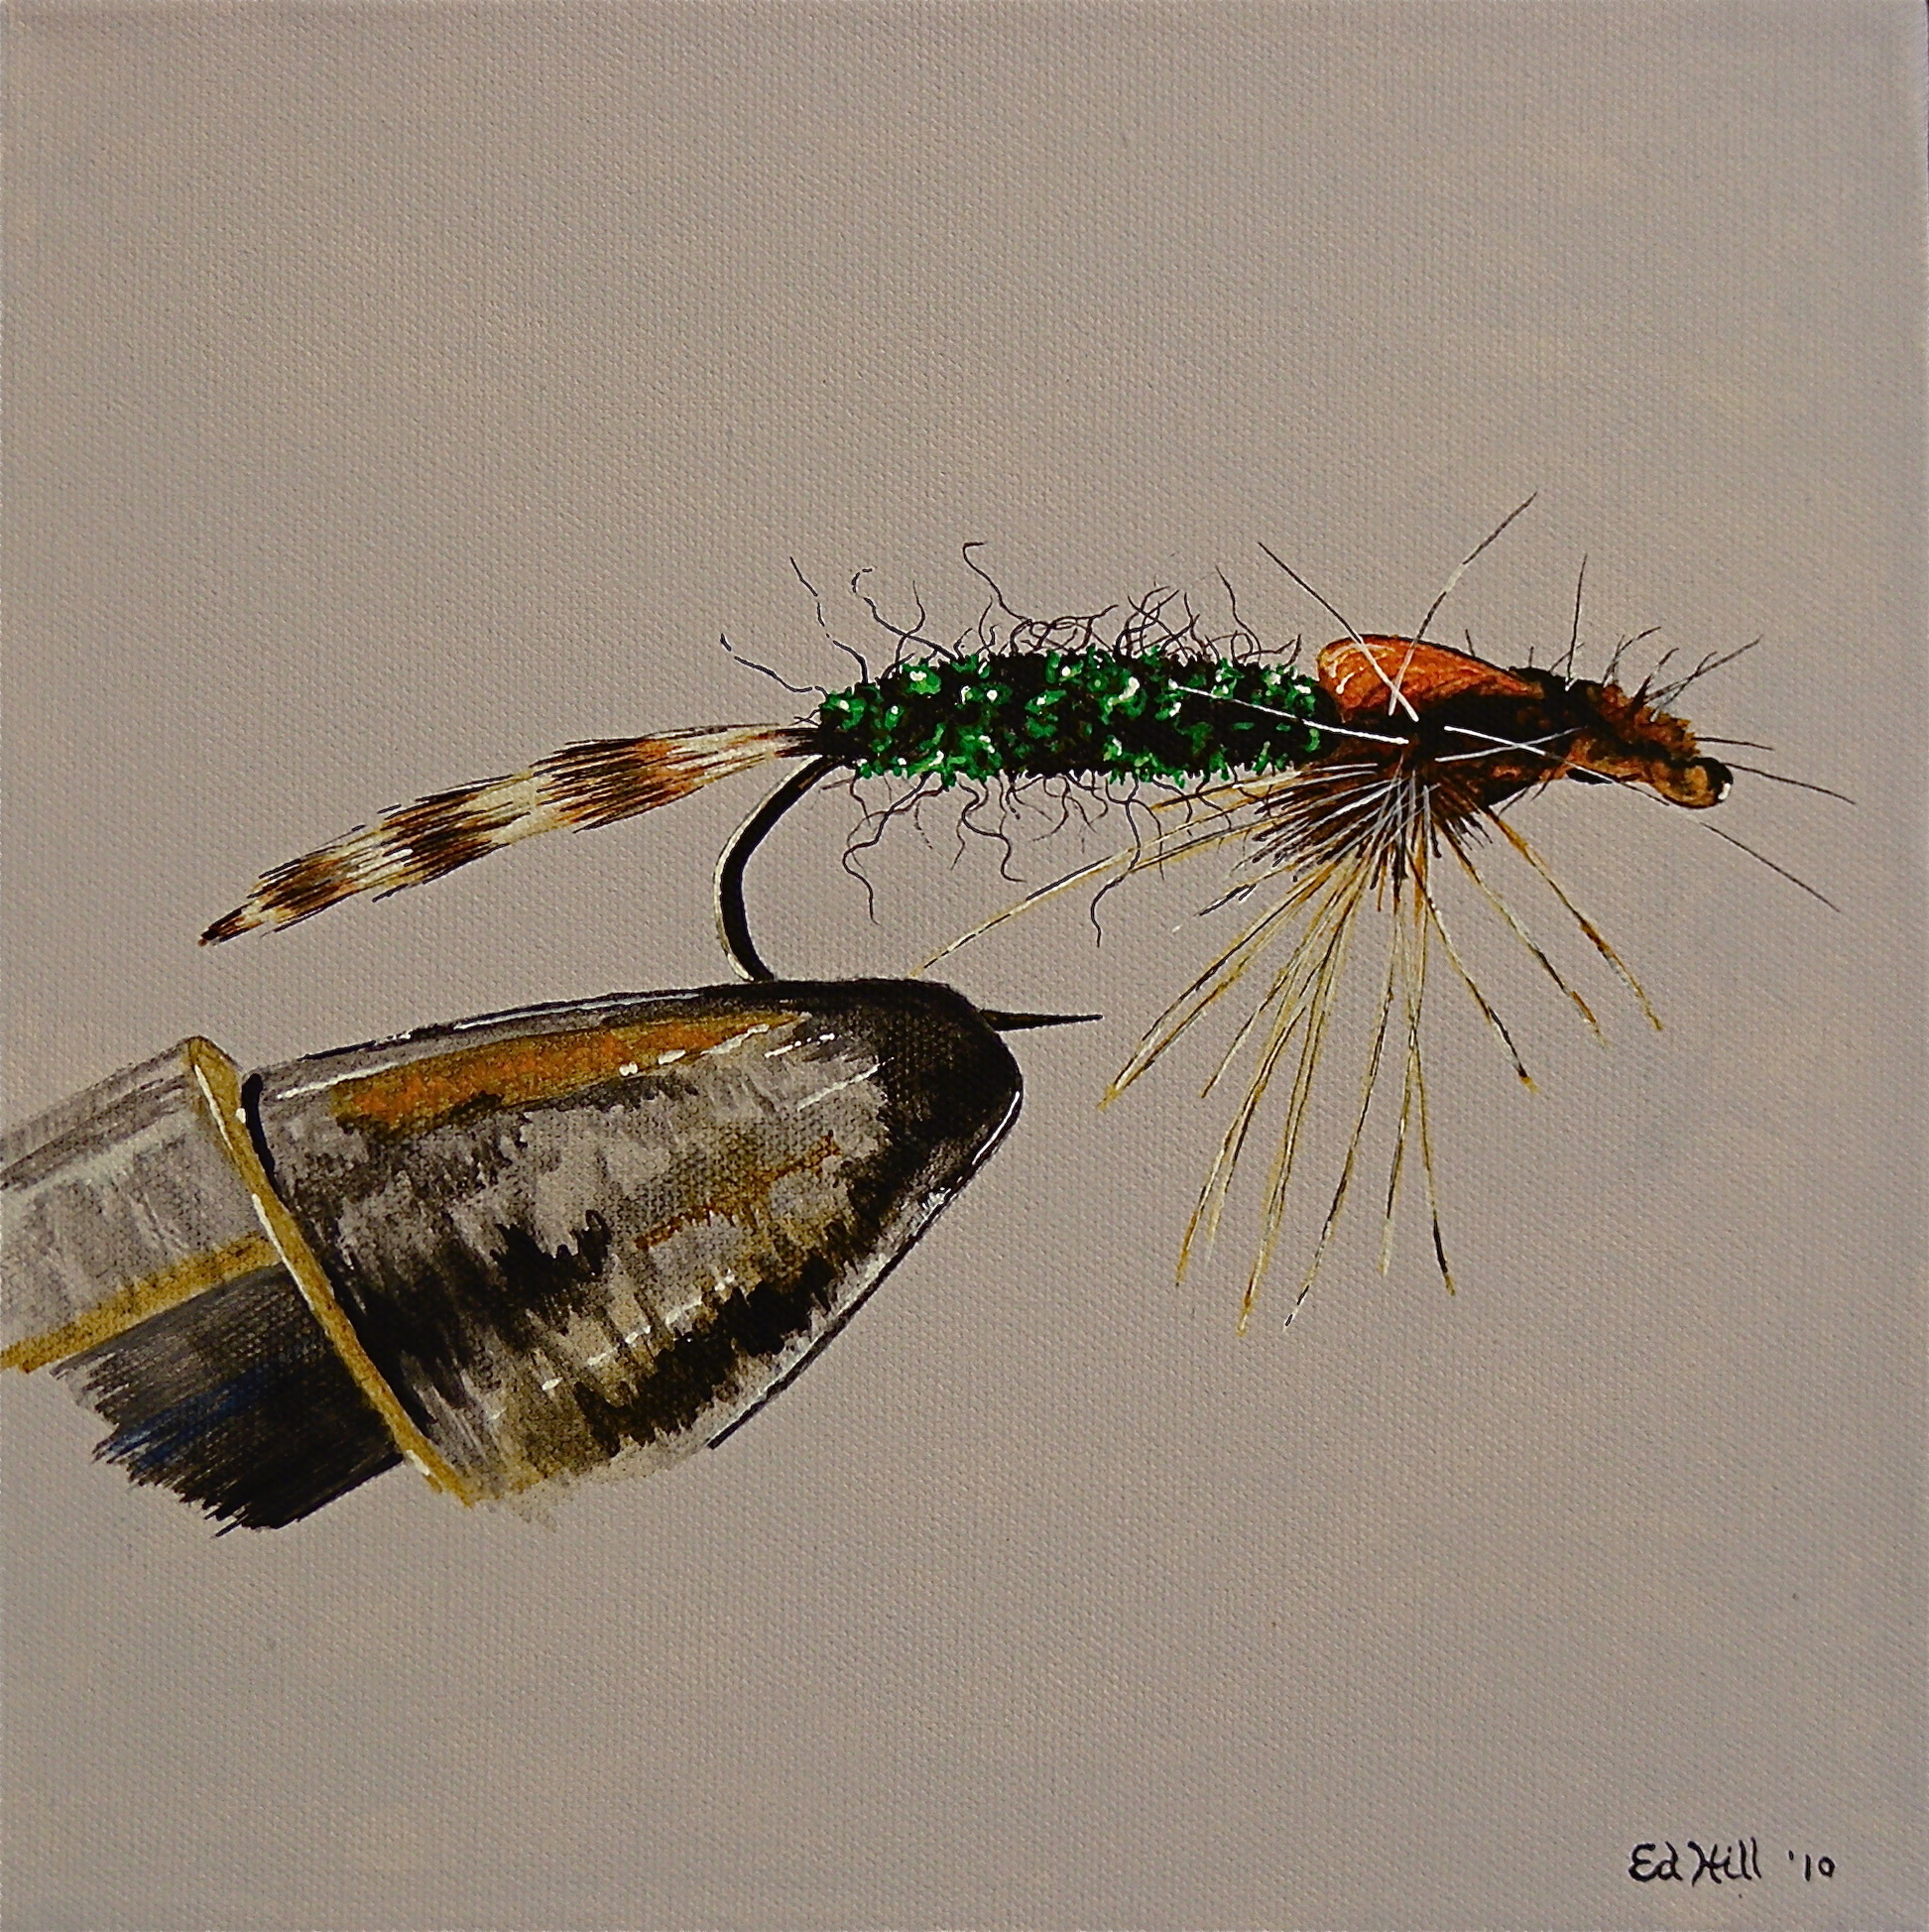 NAMING THE TROUT FLY